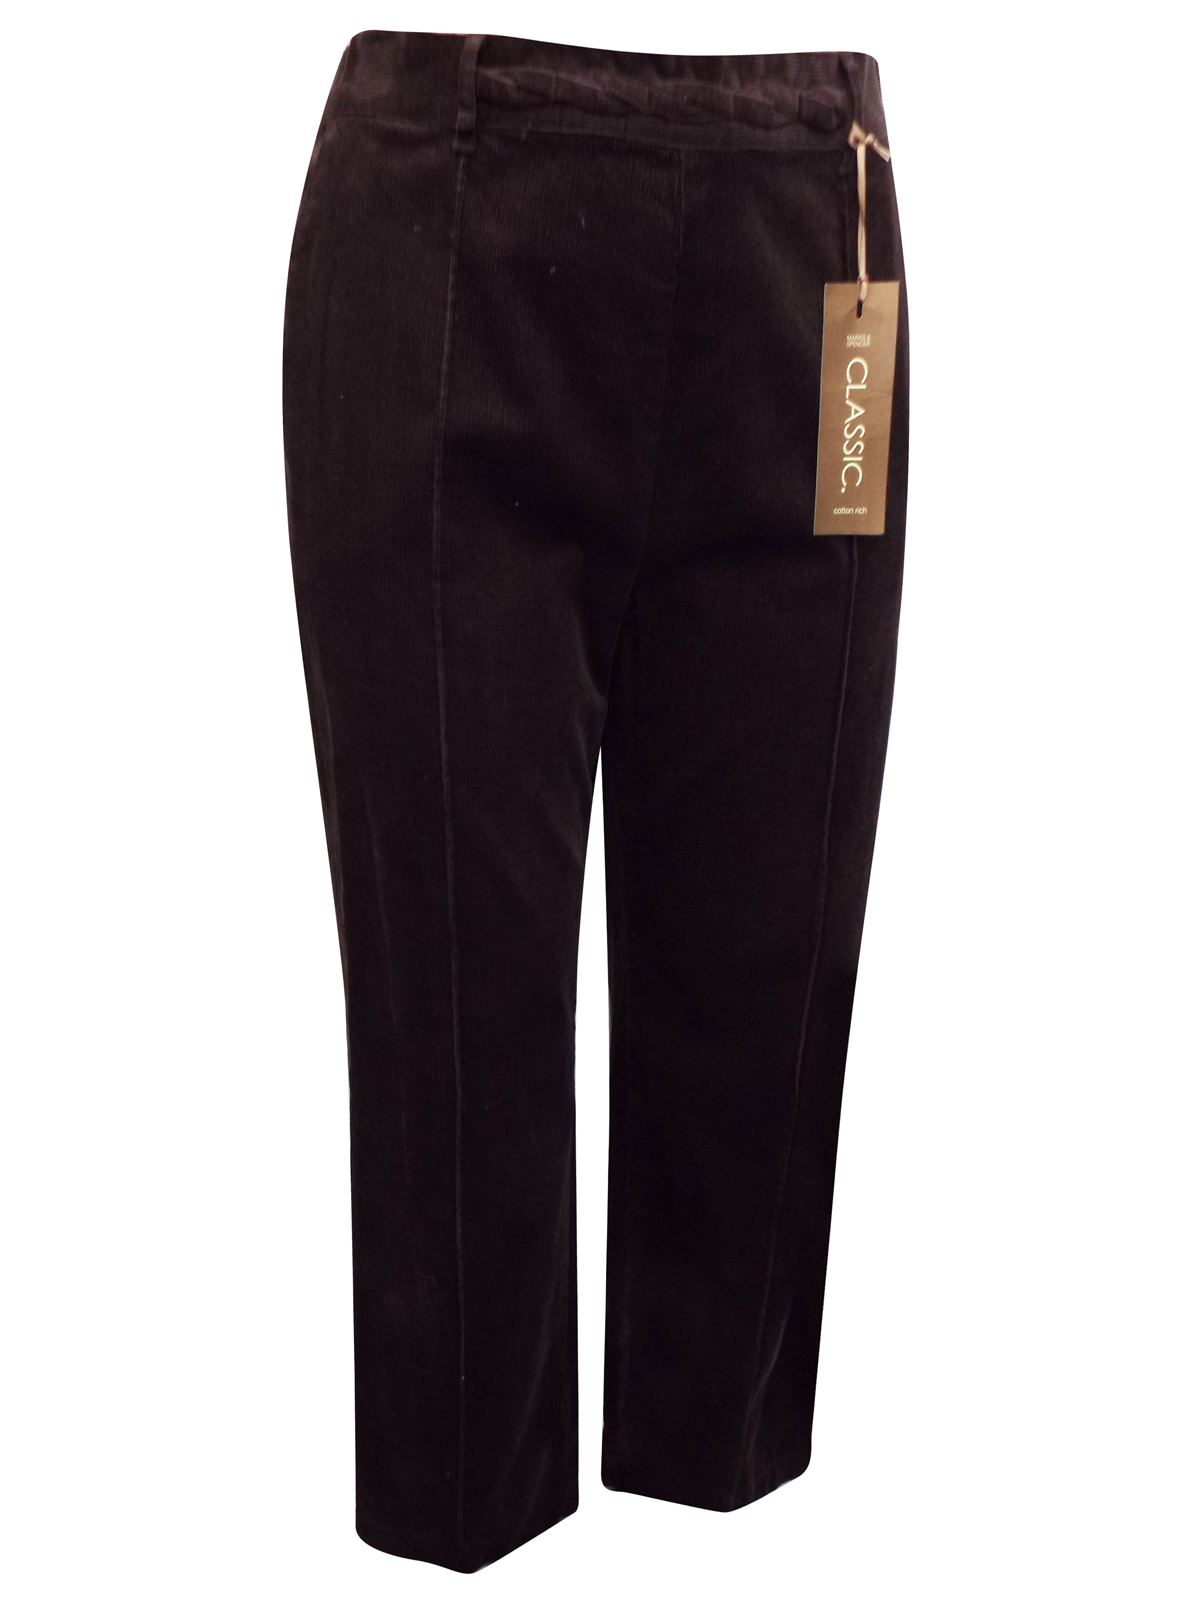 Marks and Spencer - - M&5 MINK Cotton Rich Straight Leg Cord Trousers ...